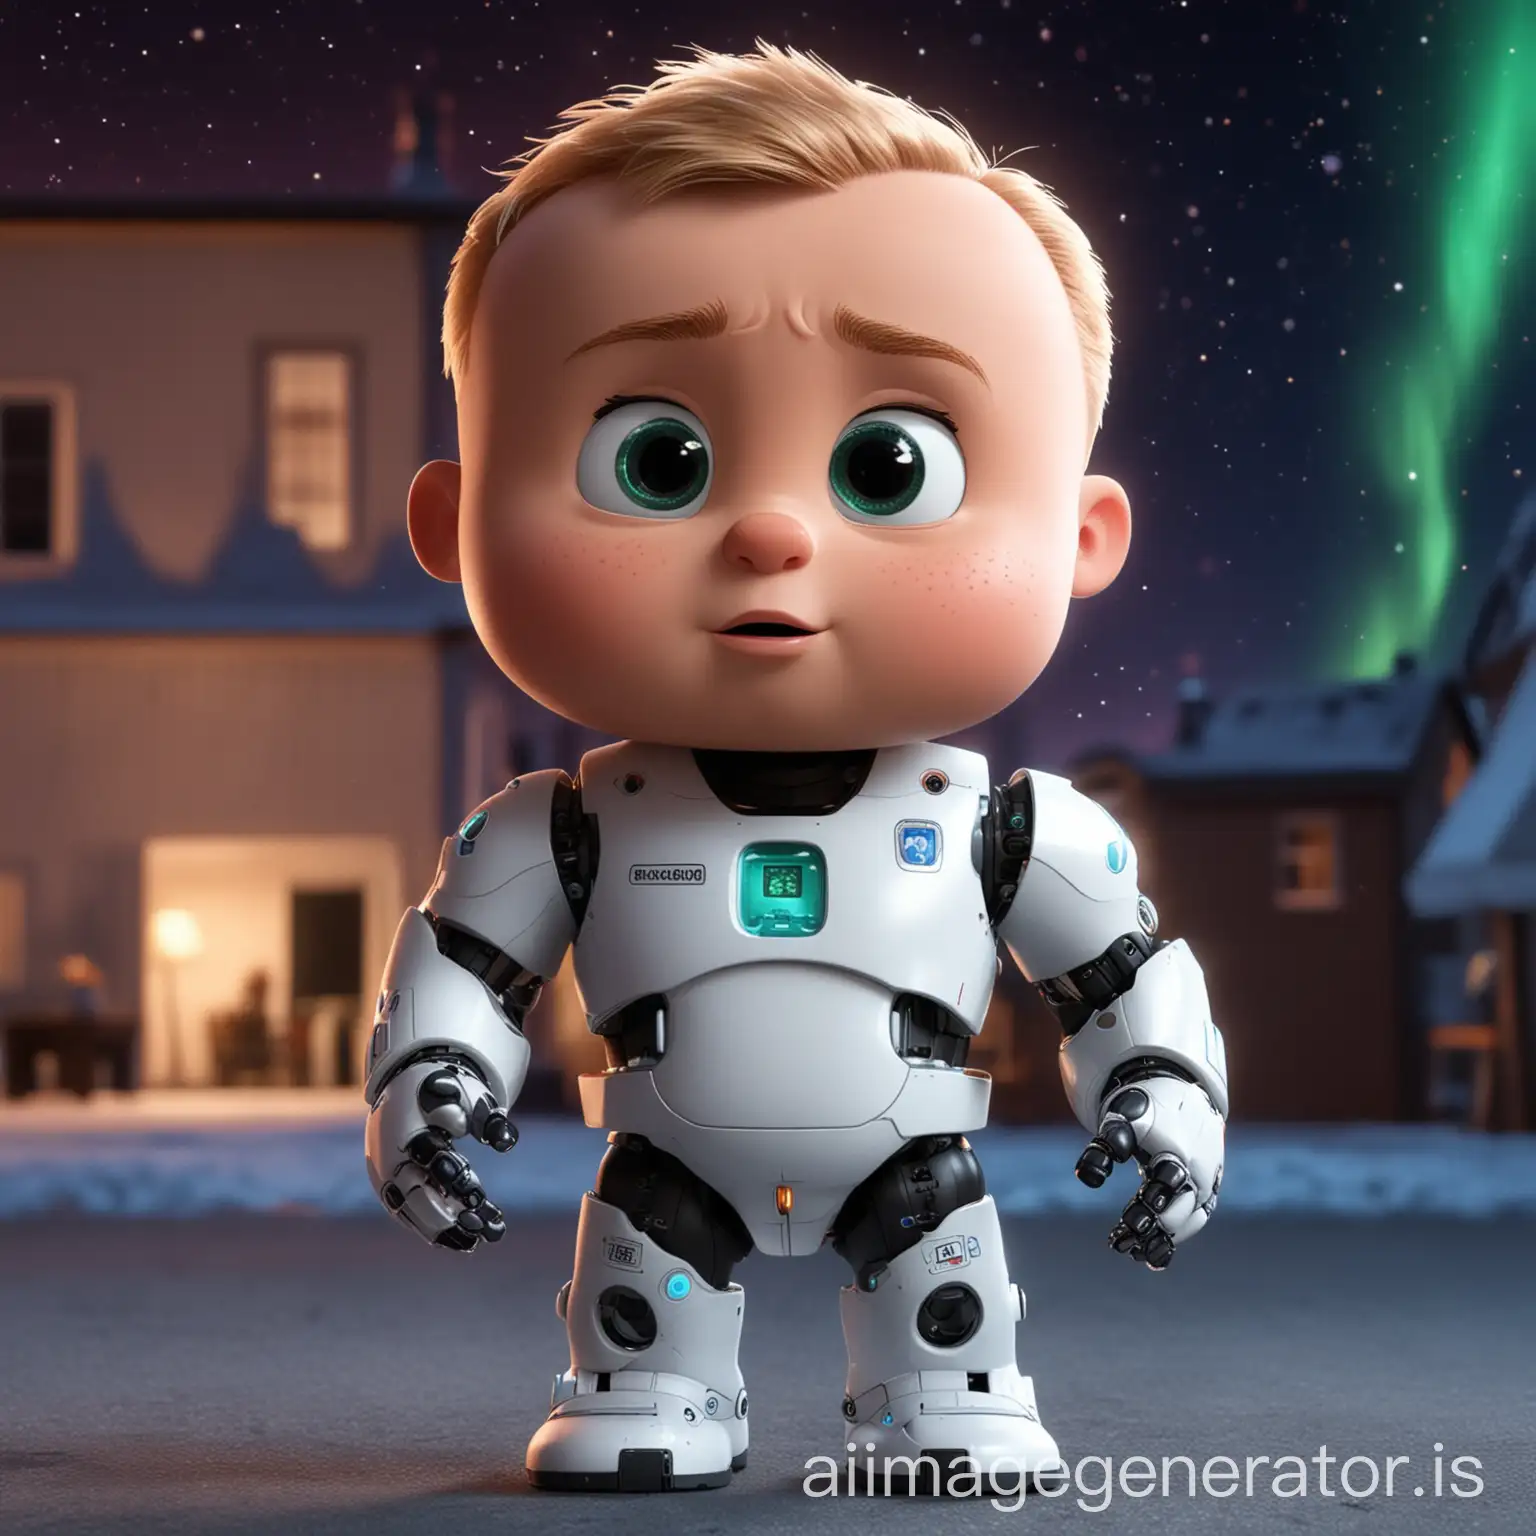 Ted from Boss baby with northern lights background wondering about post quantum cryptography - Also write how do i protect my toys from that super smart robot - curiously